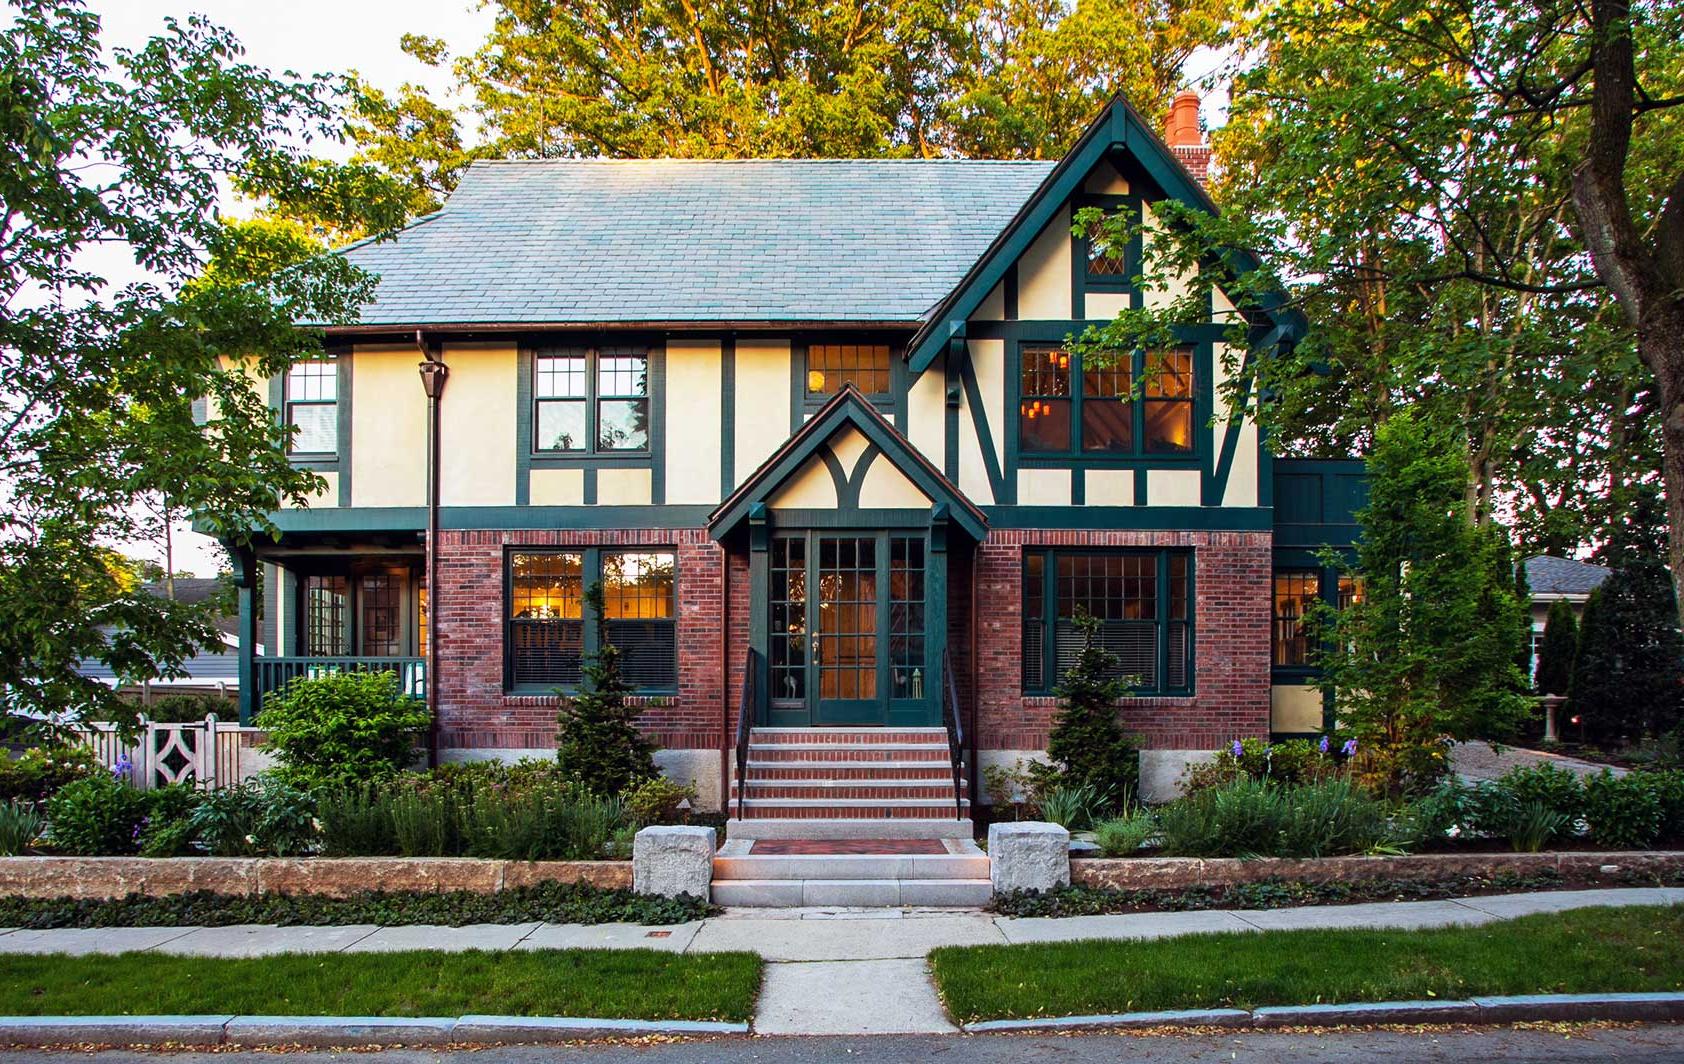 Front view of tudor revival home